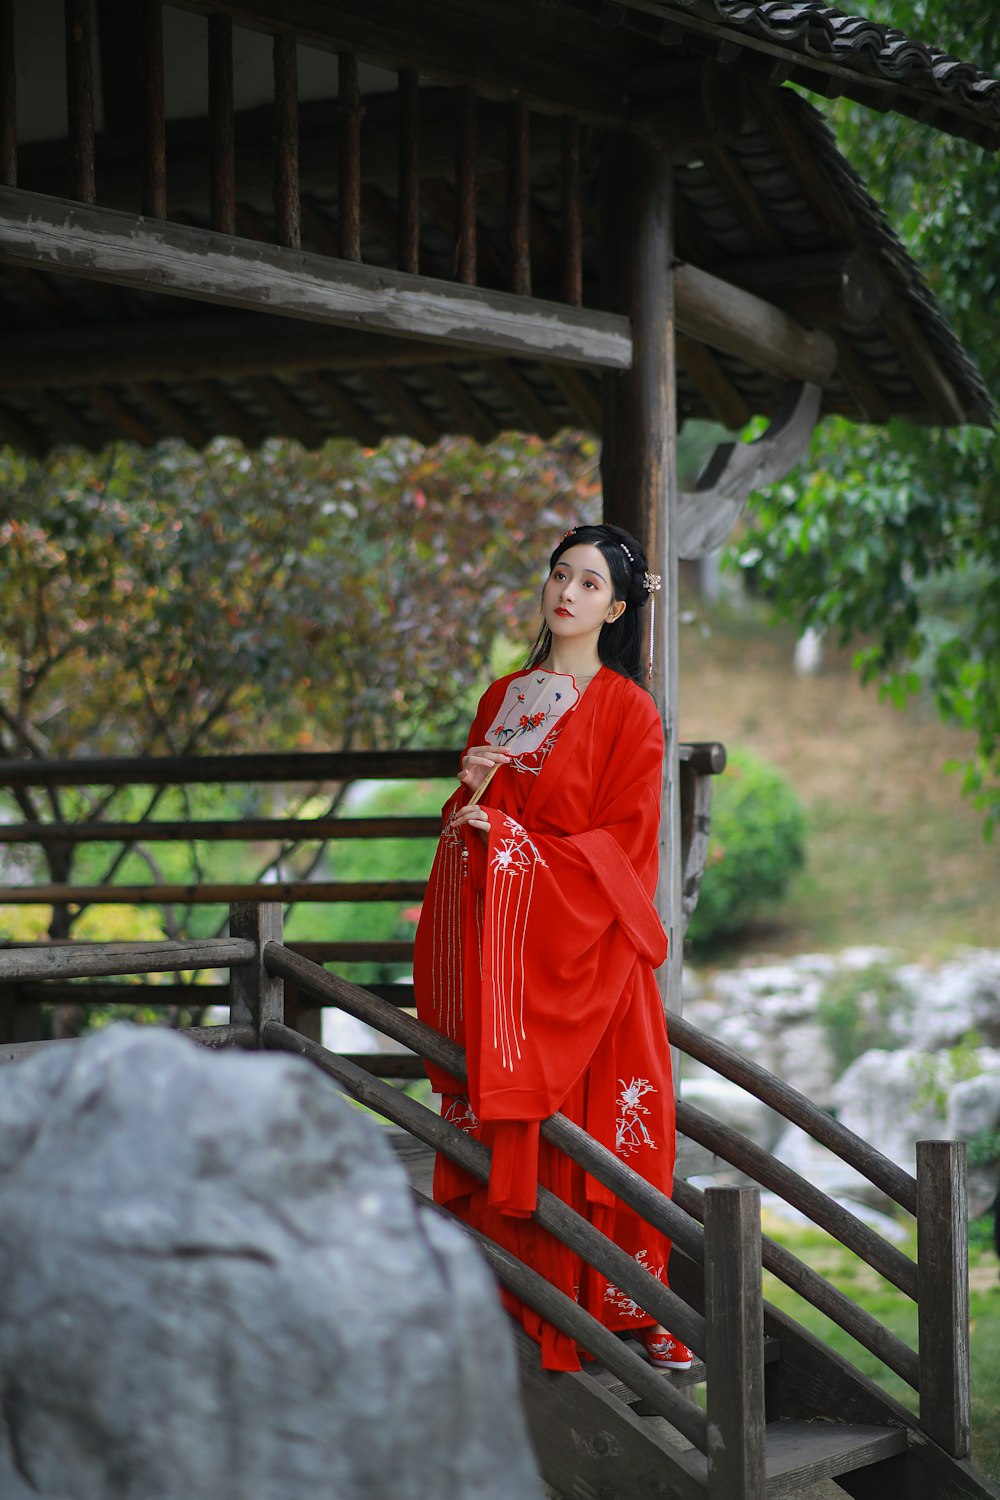 woman in red and white sari standing near brown wooden gazebo during daytime